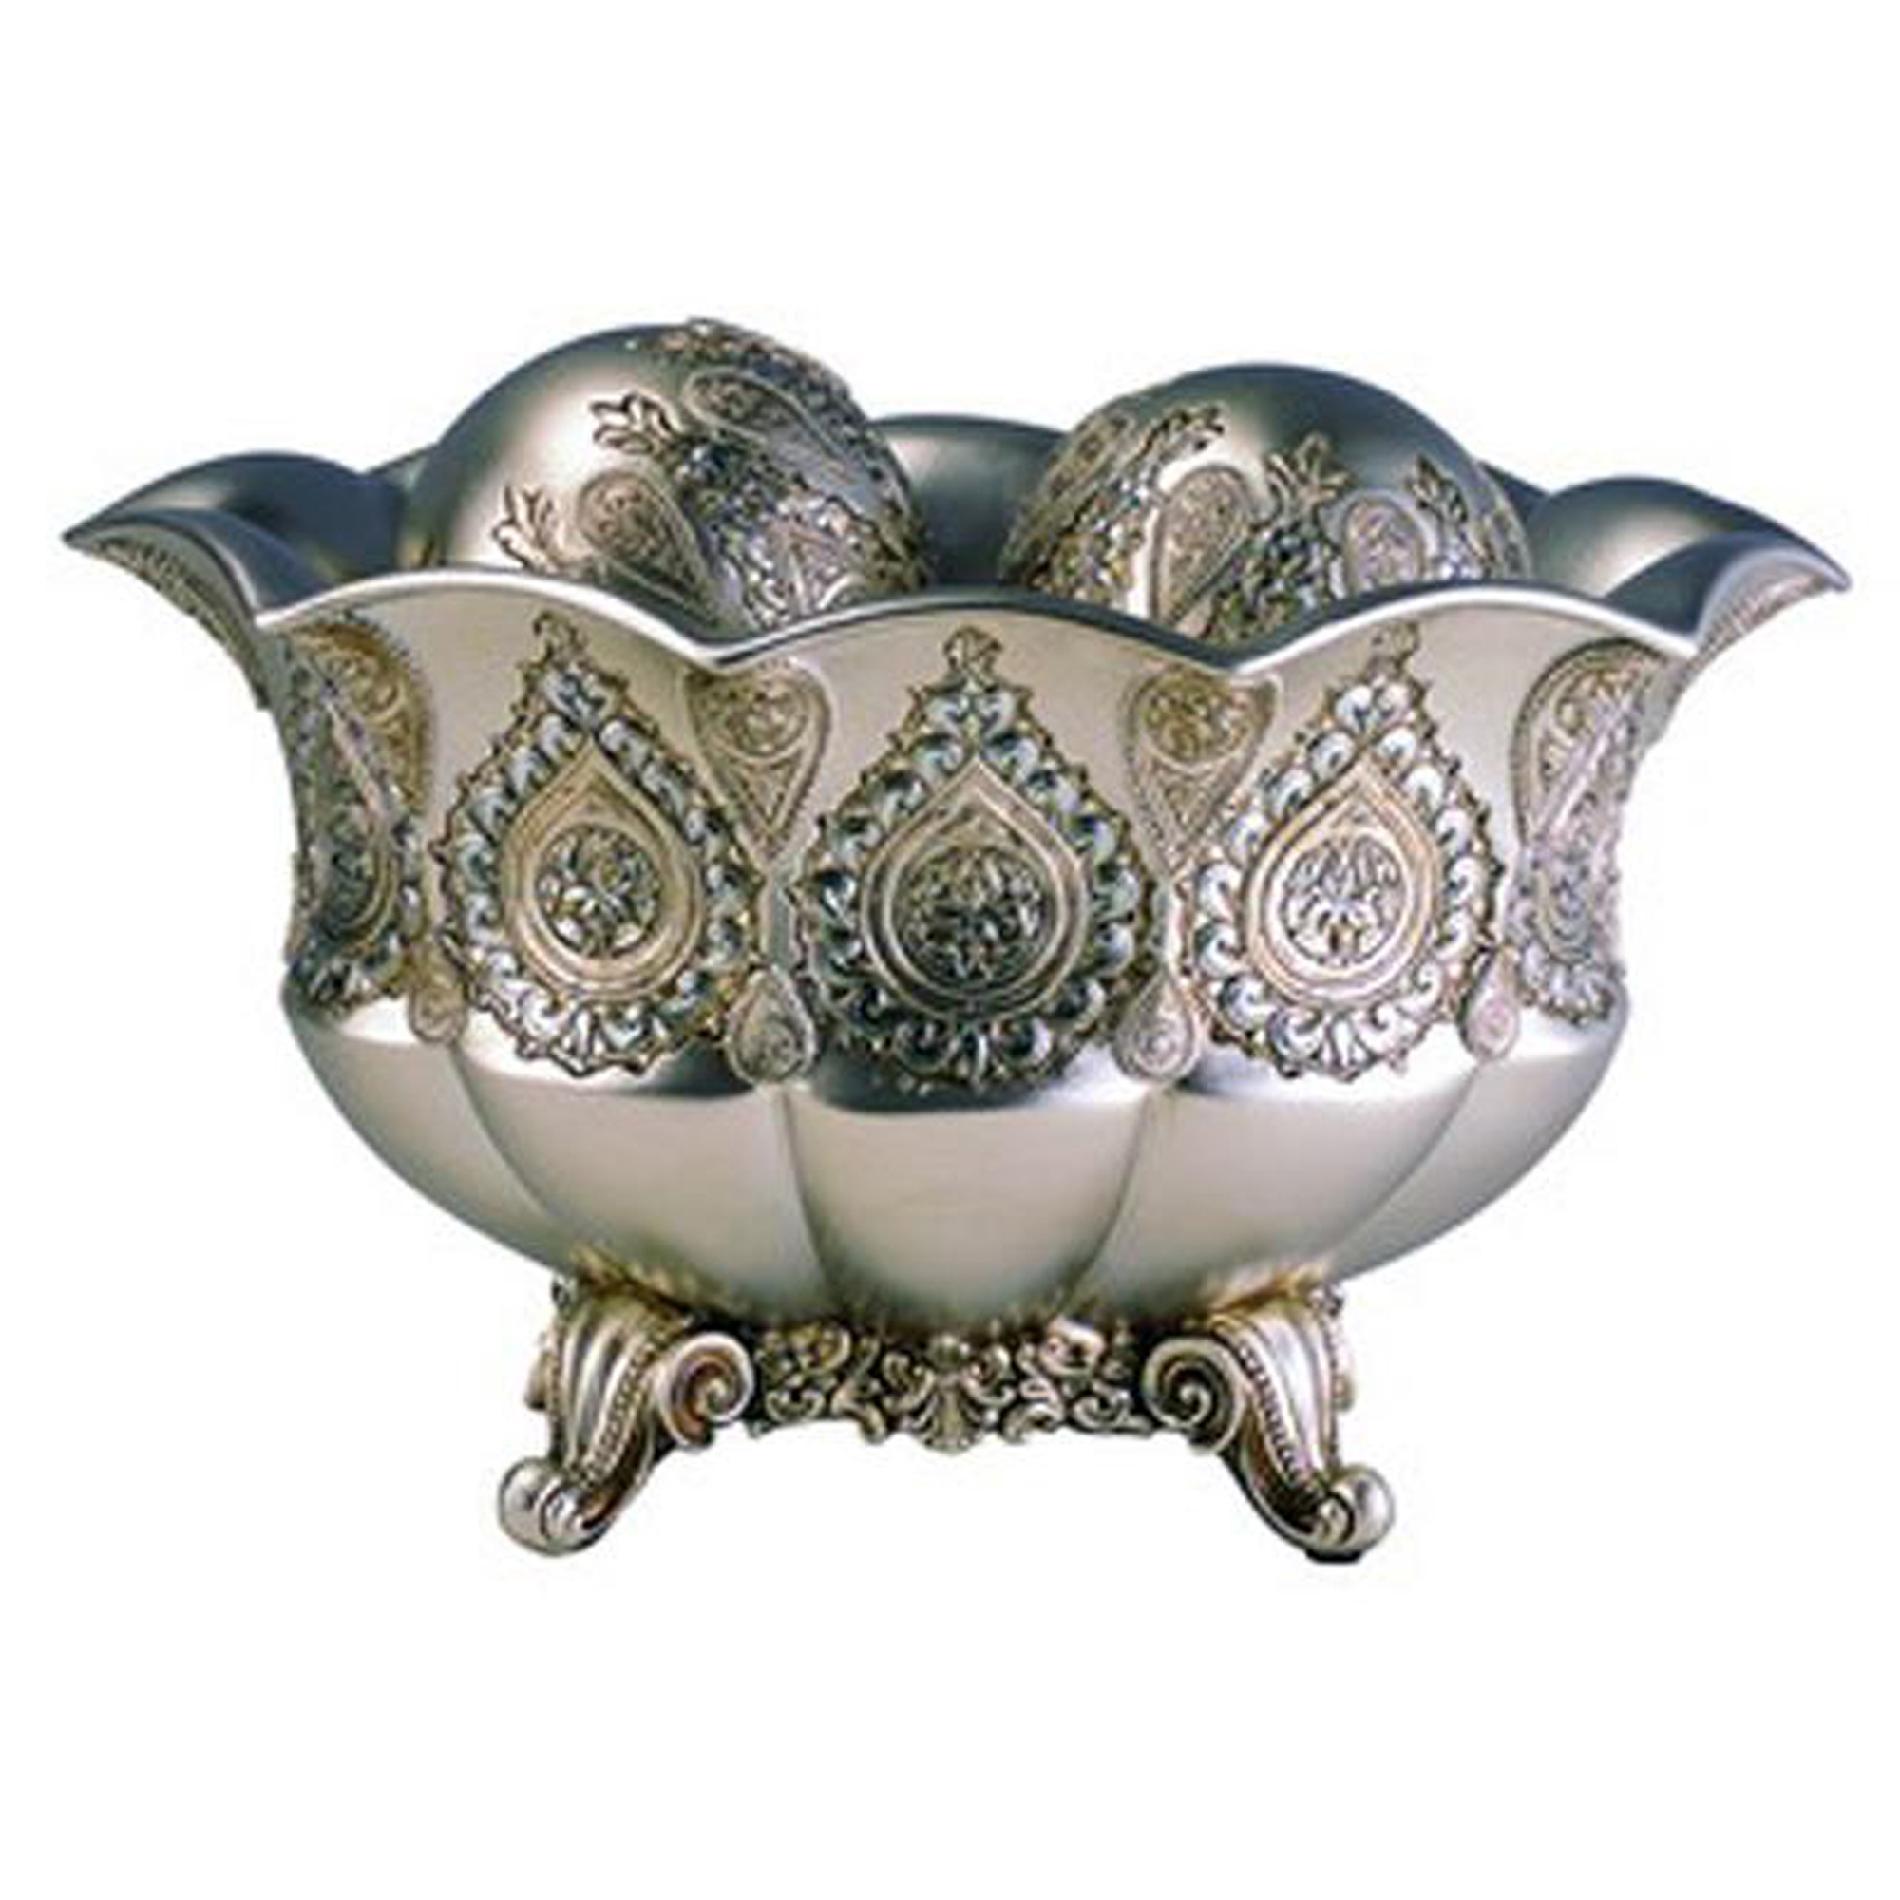 Ore International 7"H Traditional Royal Silver And Gold Metalic Decorative Bowl With Spheres